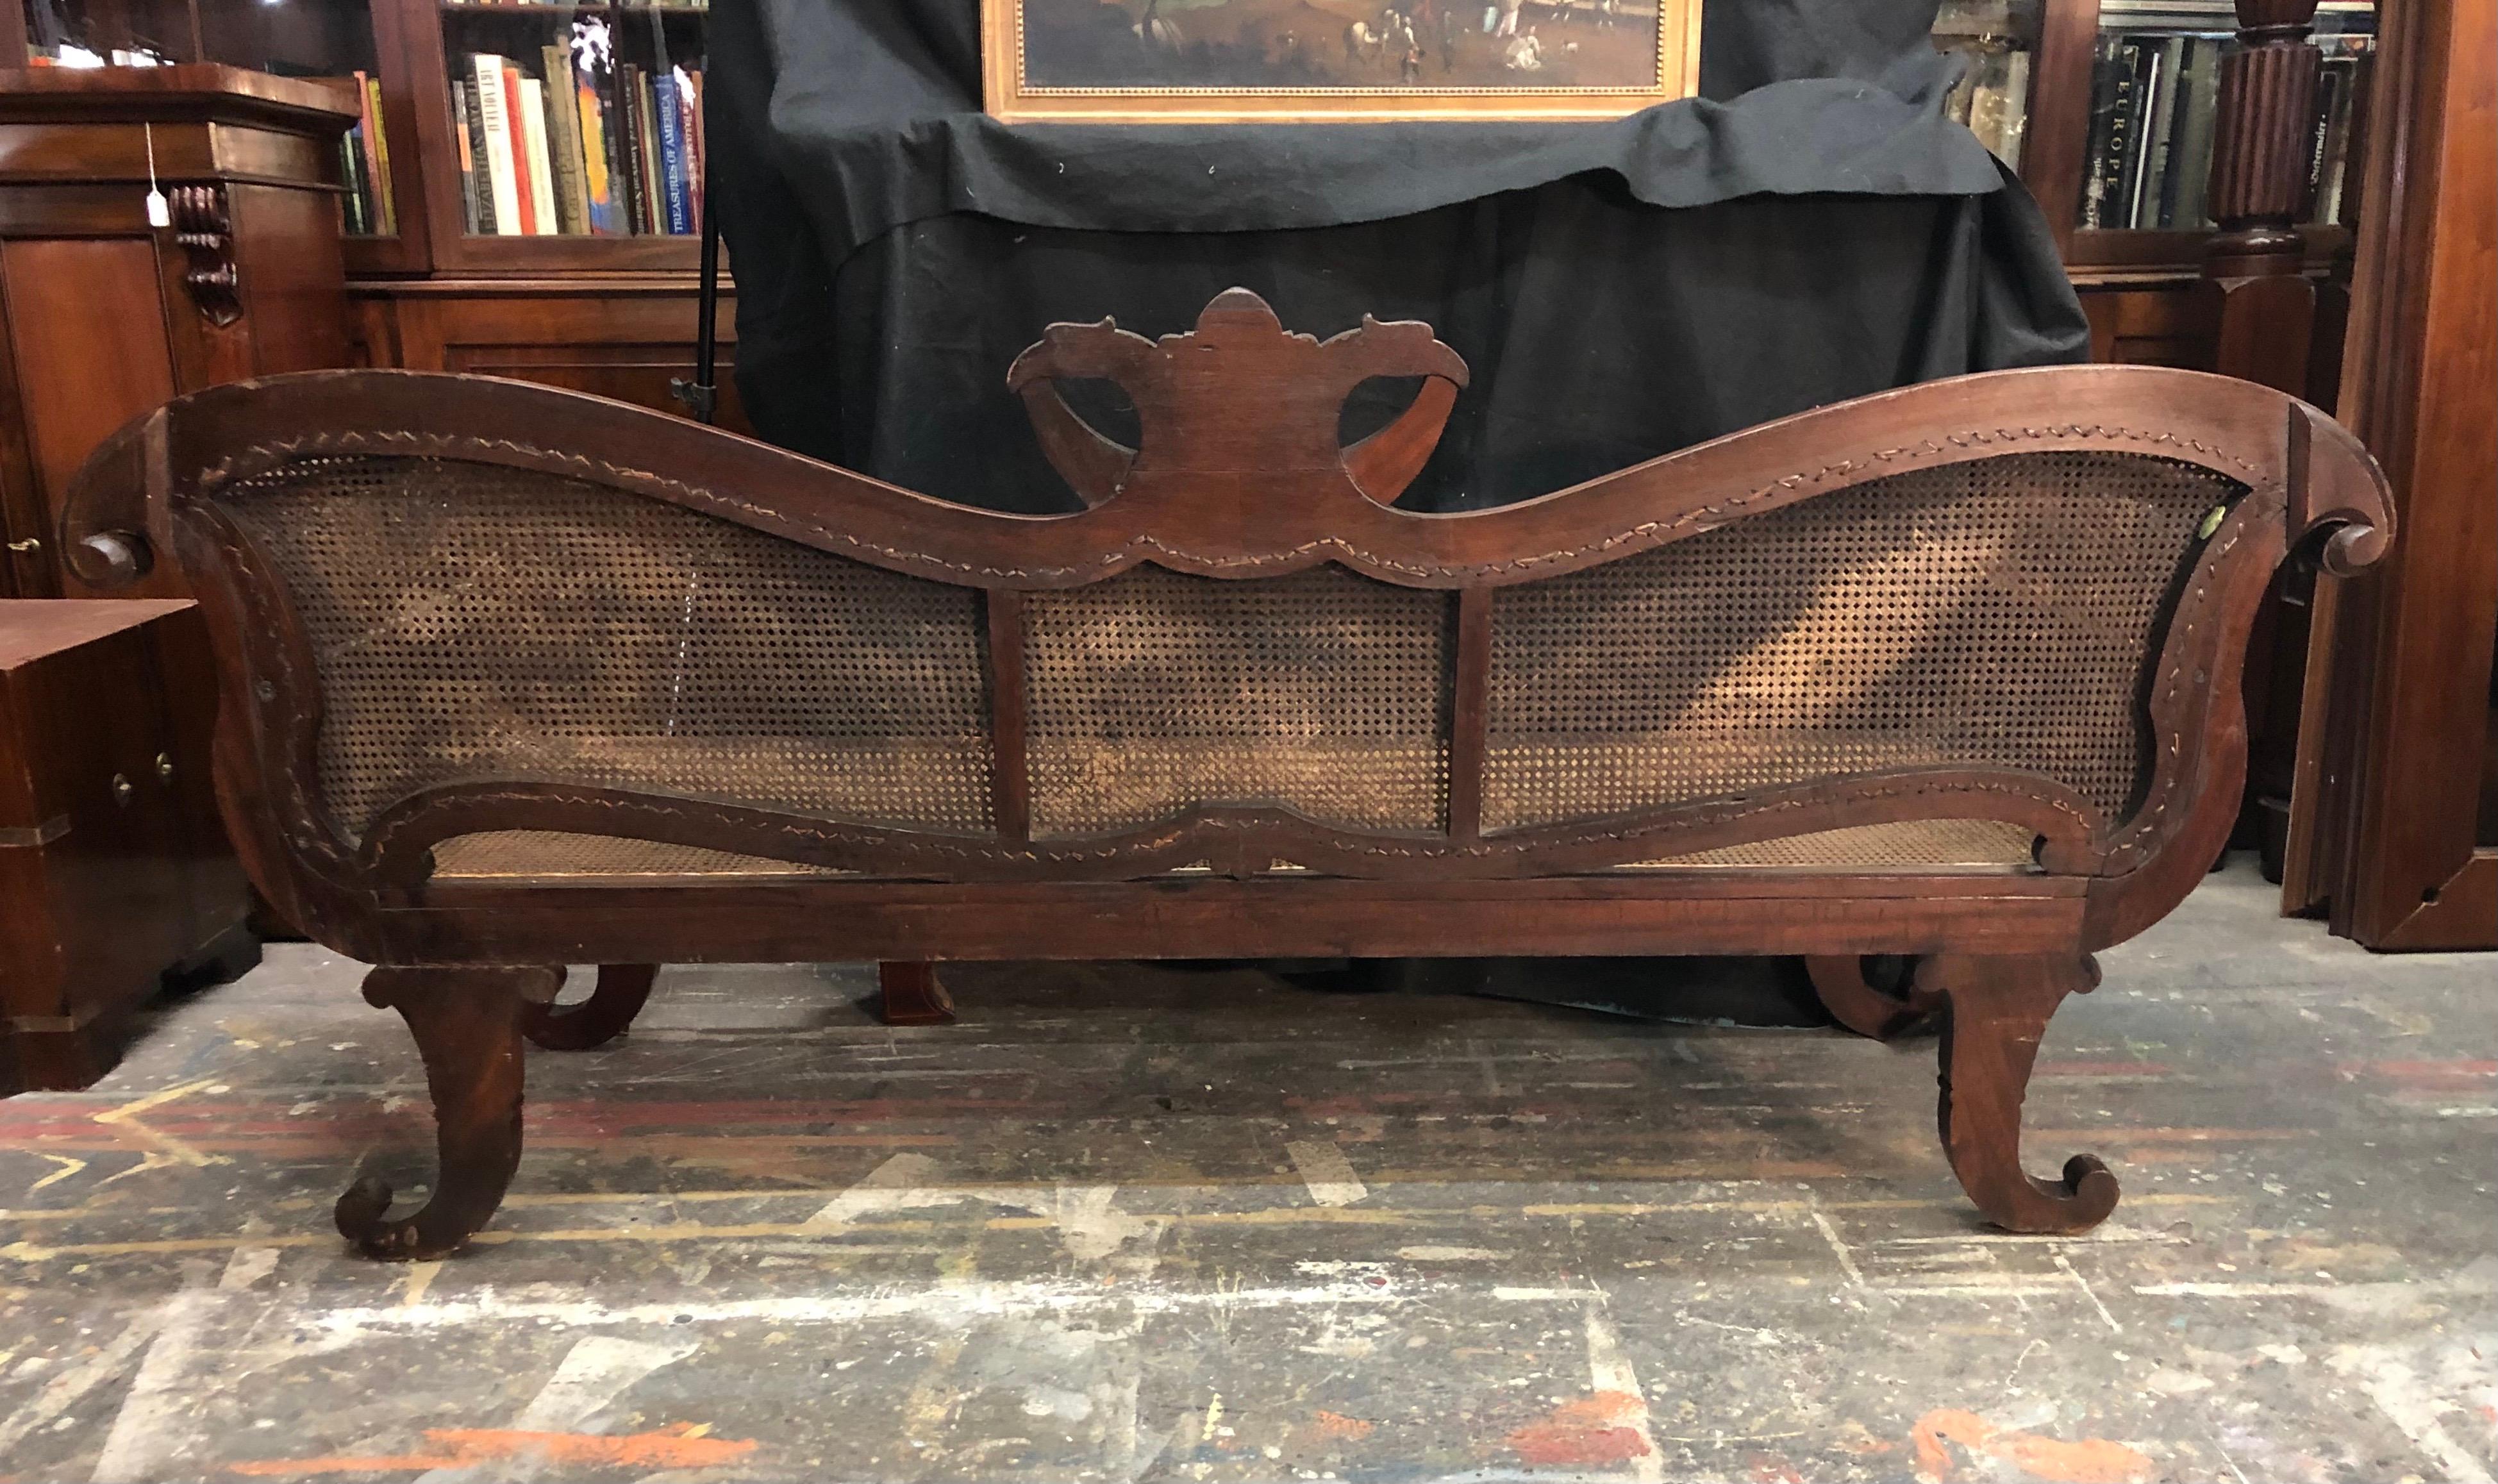 Cuban Empire Carved Mahogany Hand Caned Sofa / Settee, Early 19th Century For Sale 1